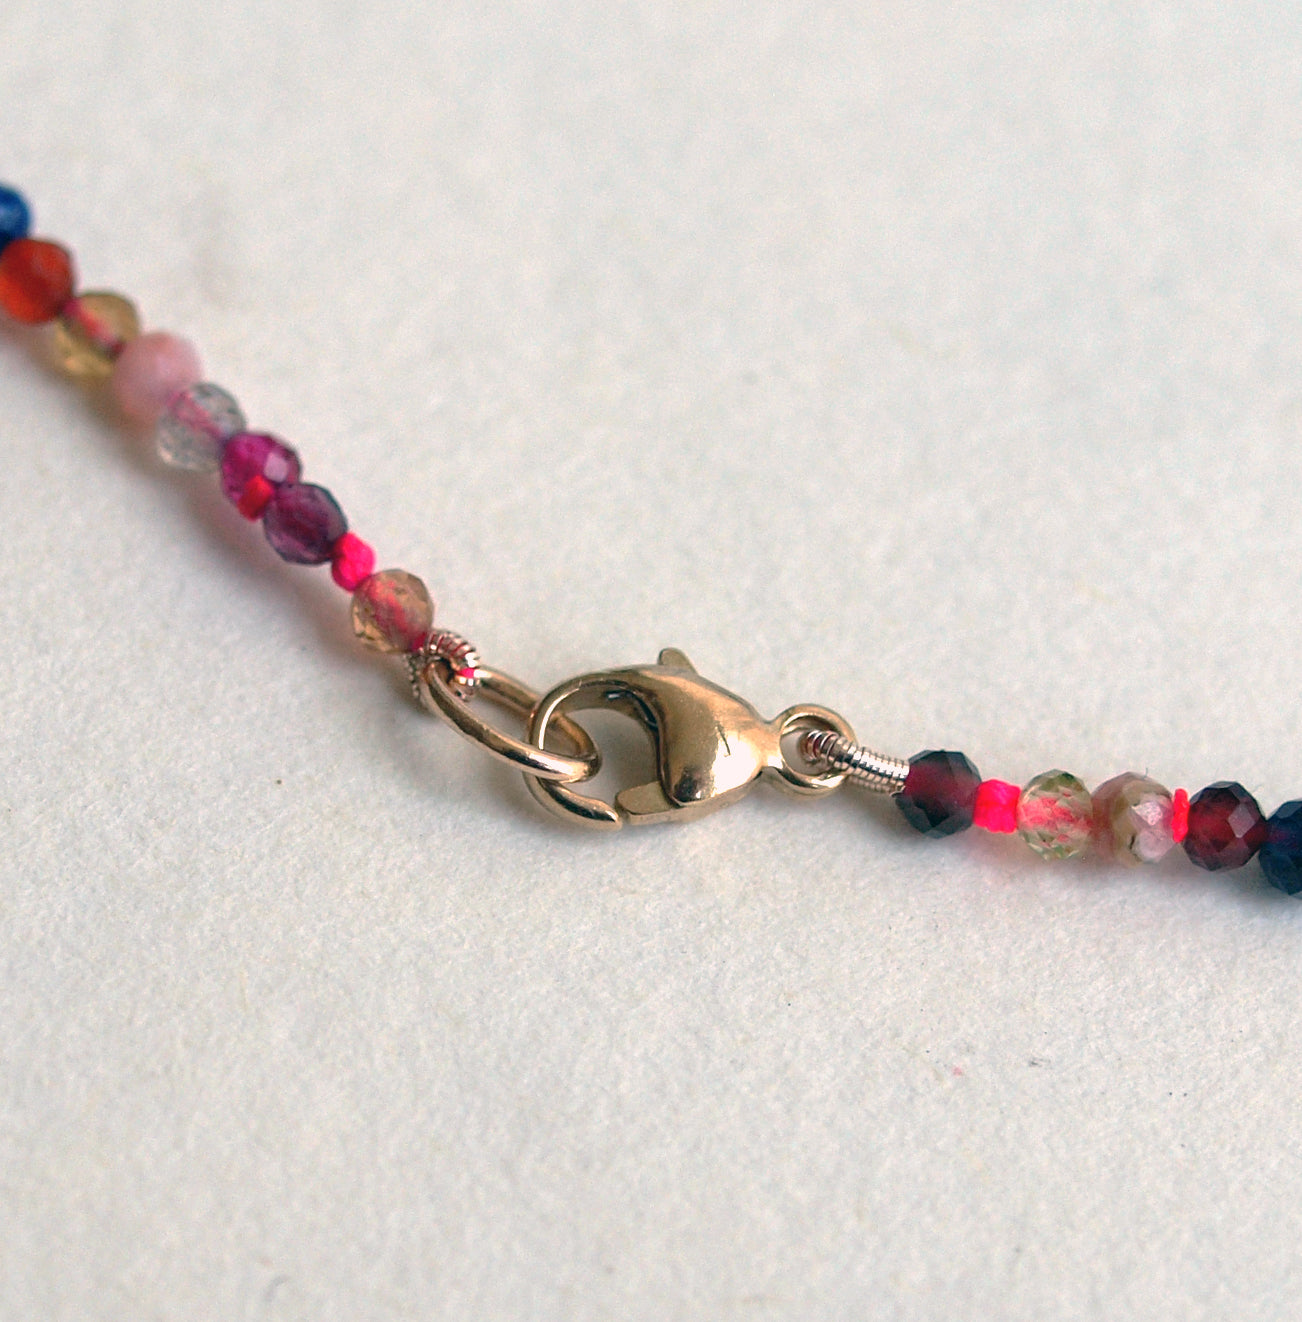 Sample Mini Beaded Colorful Necklace